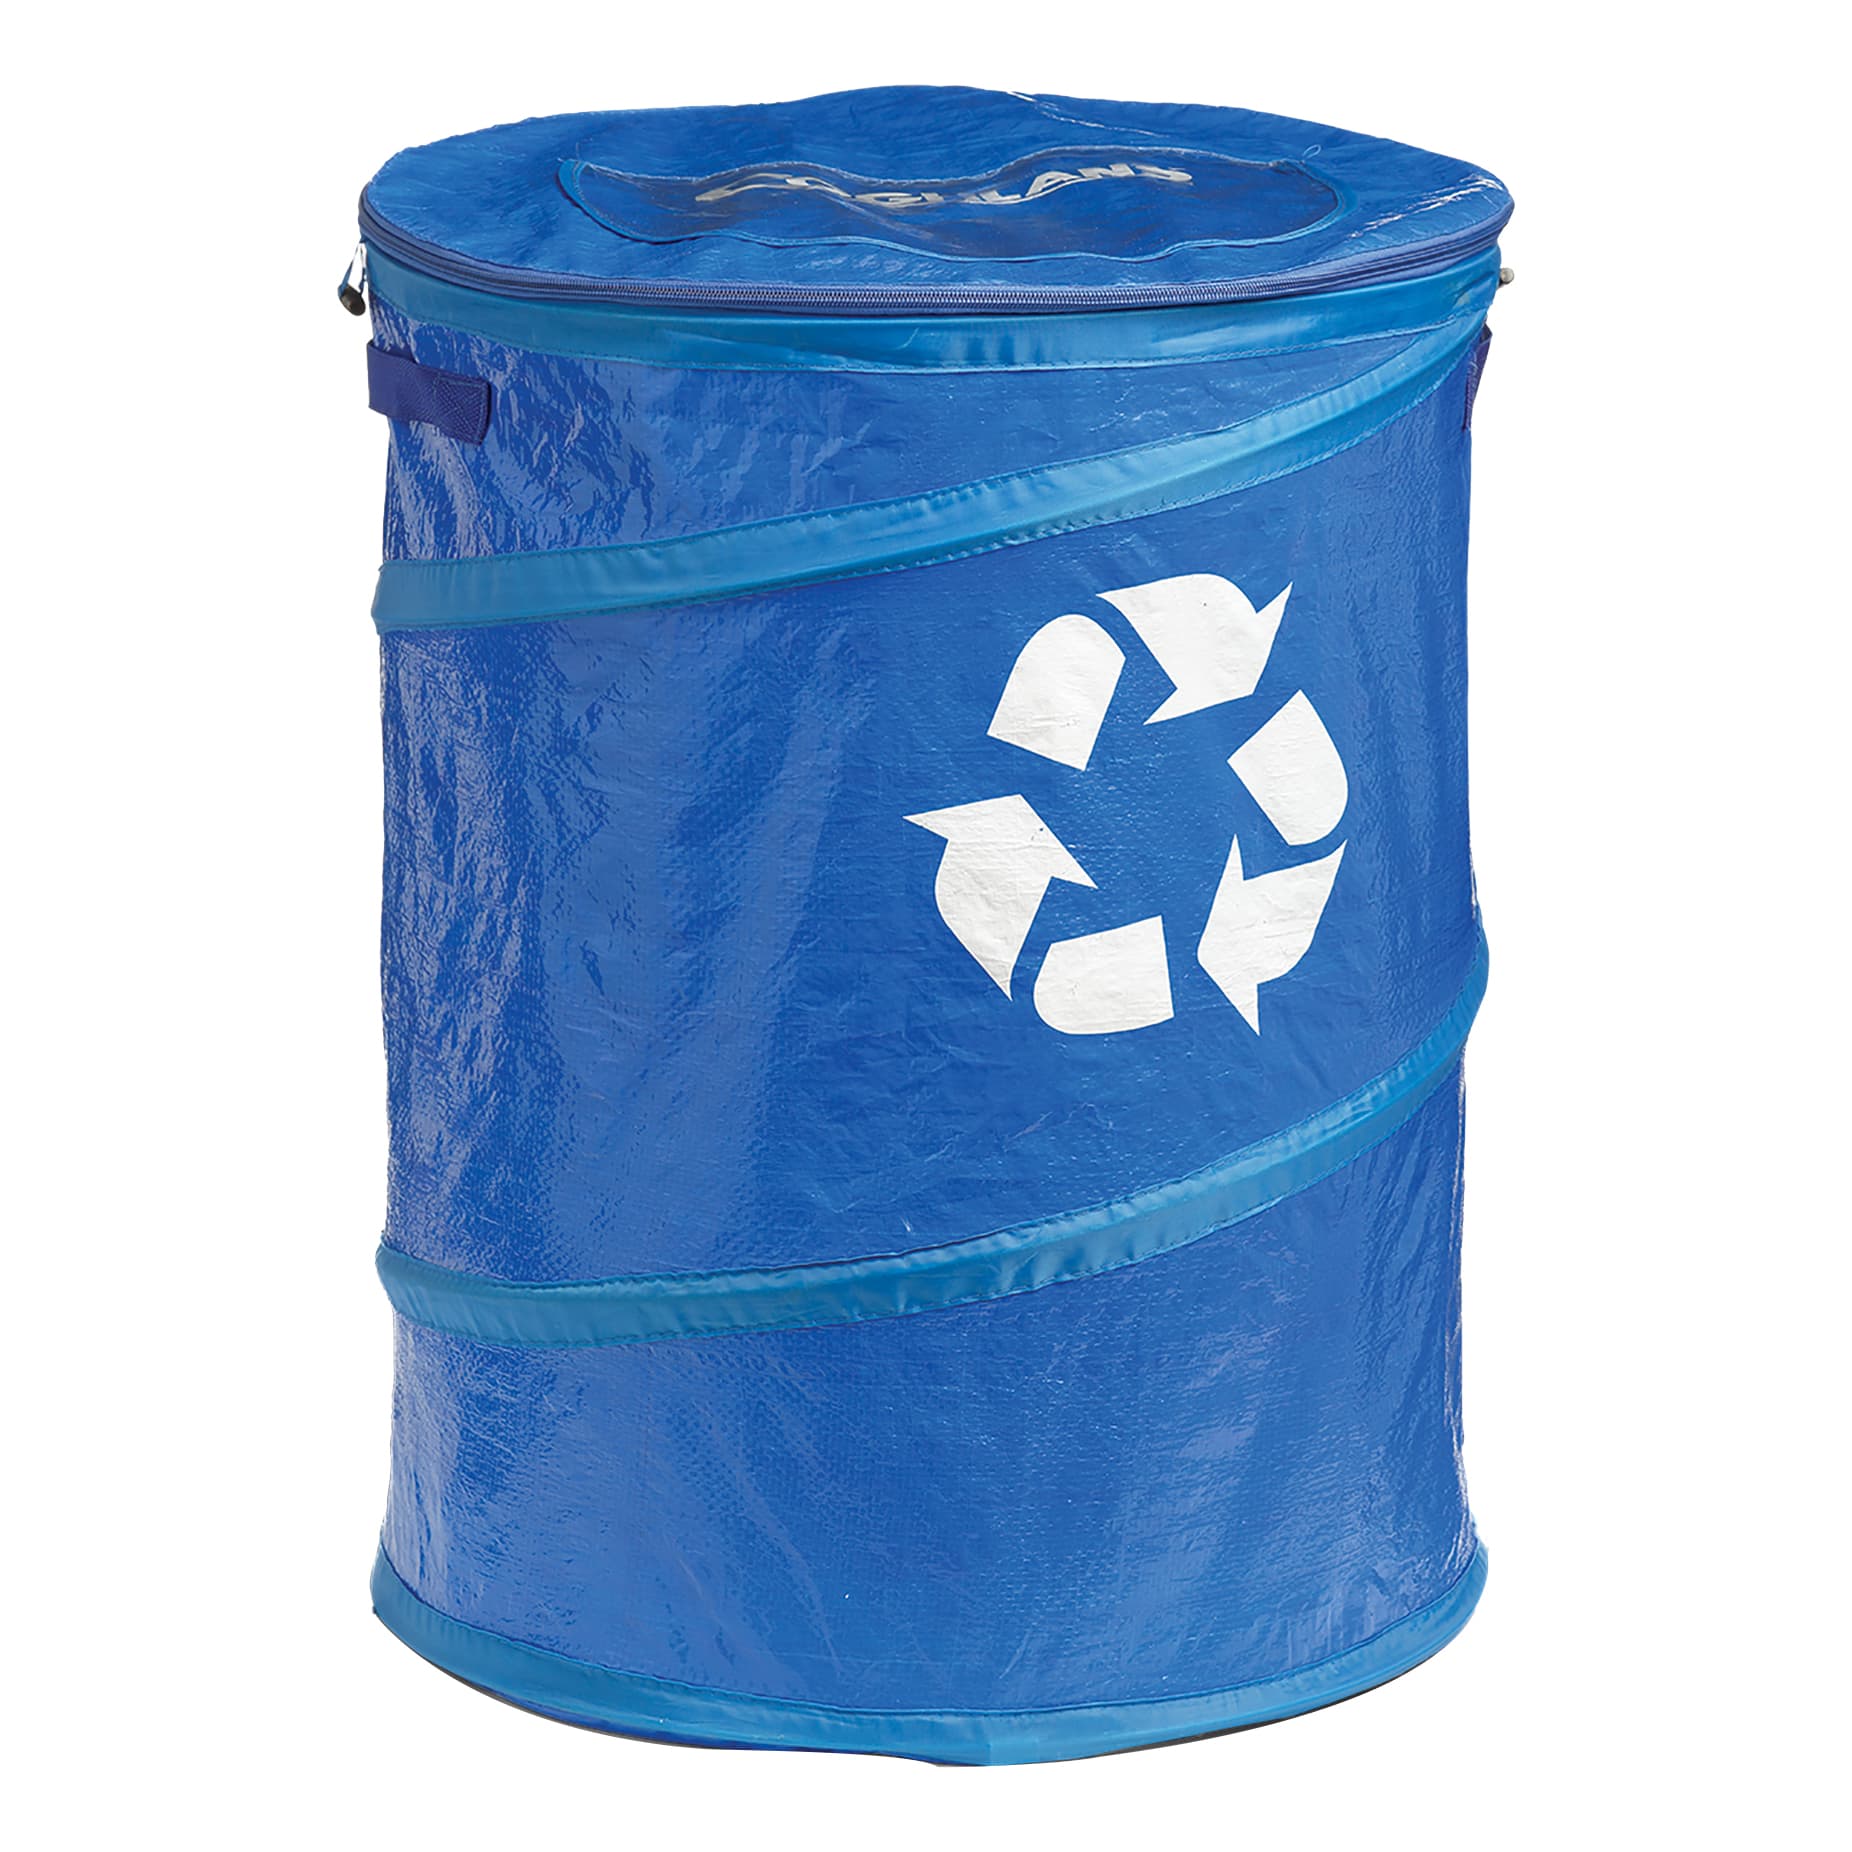 Coghlan's® Pop-Up Recycle Bin - Unfolded View